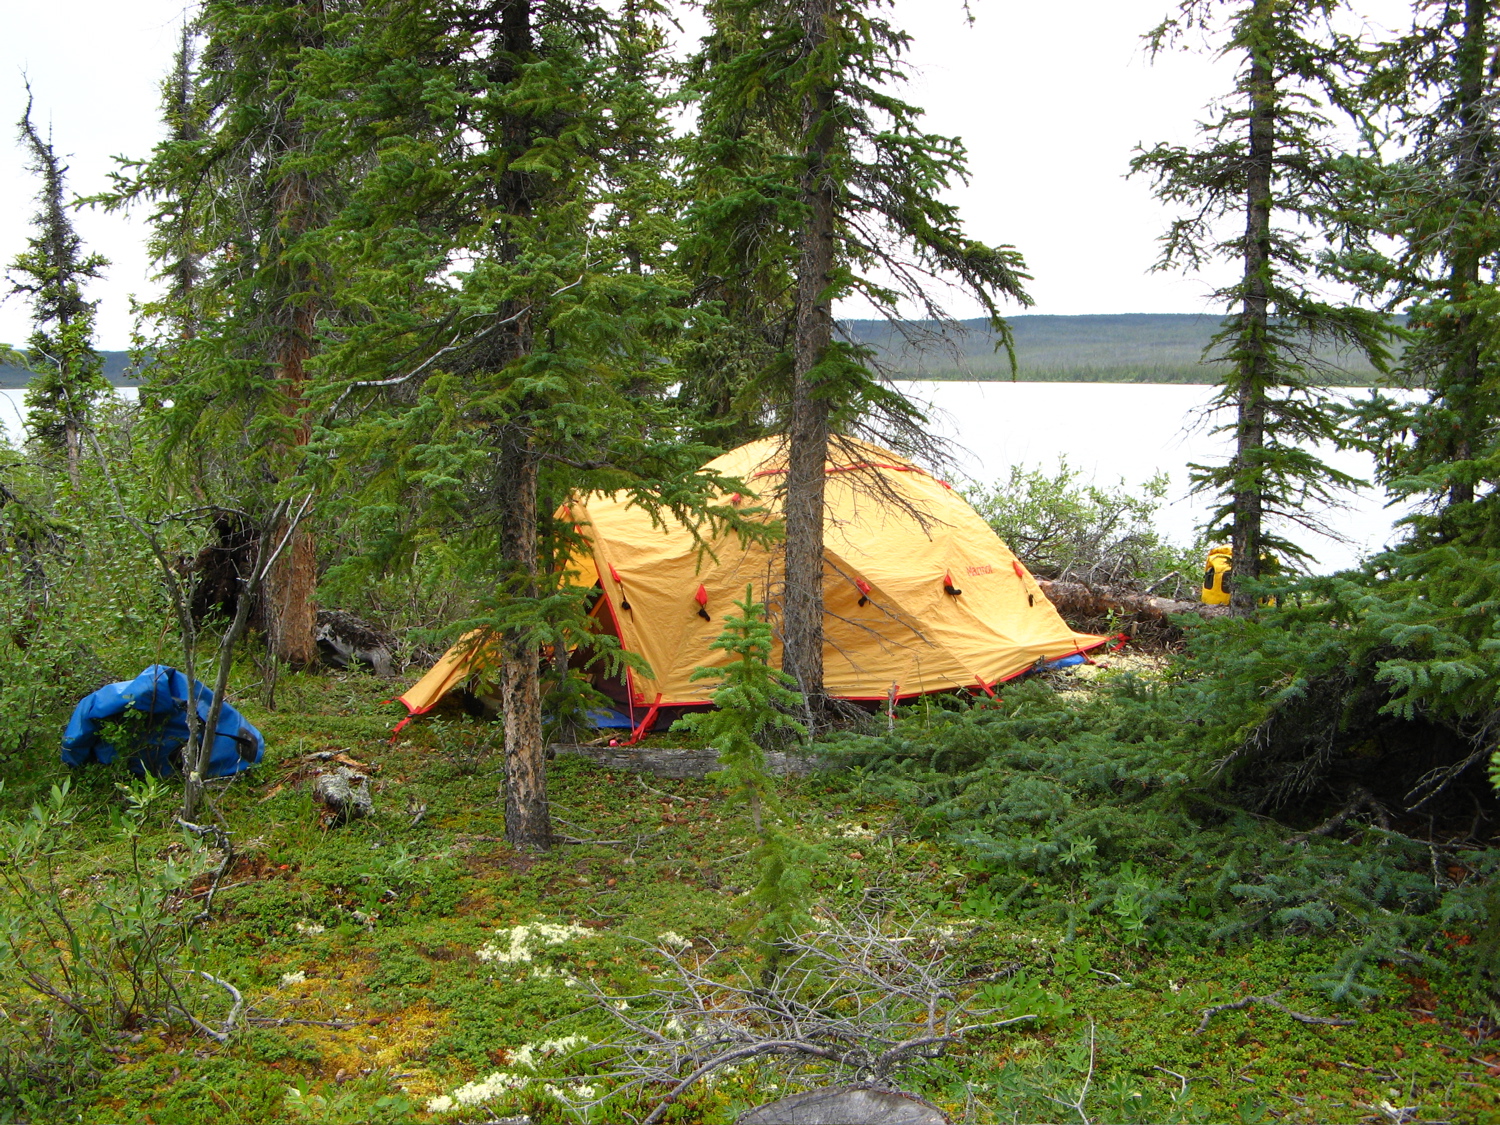 Back in the boreal forest, last camp